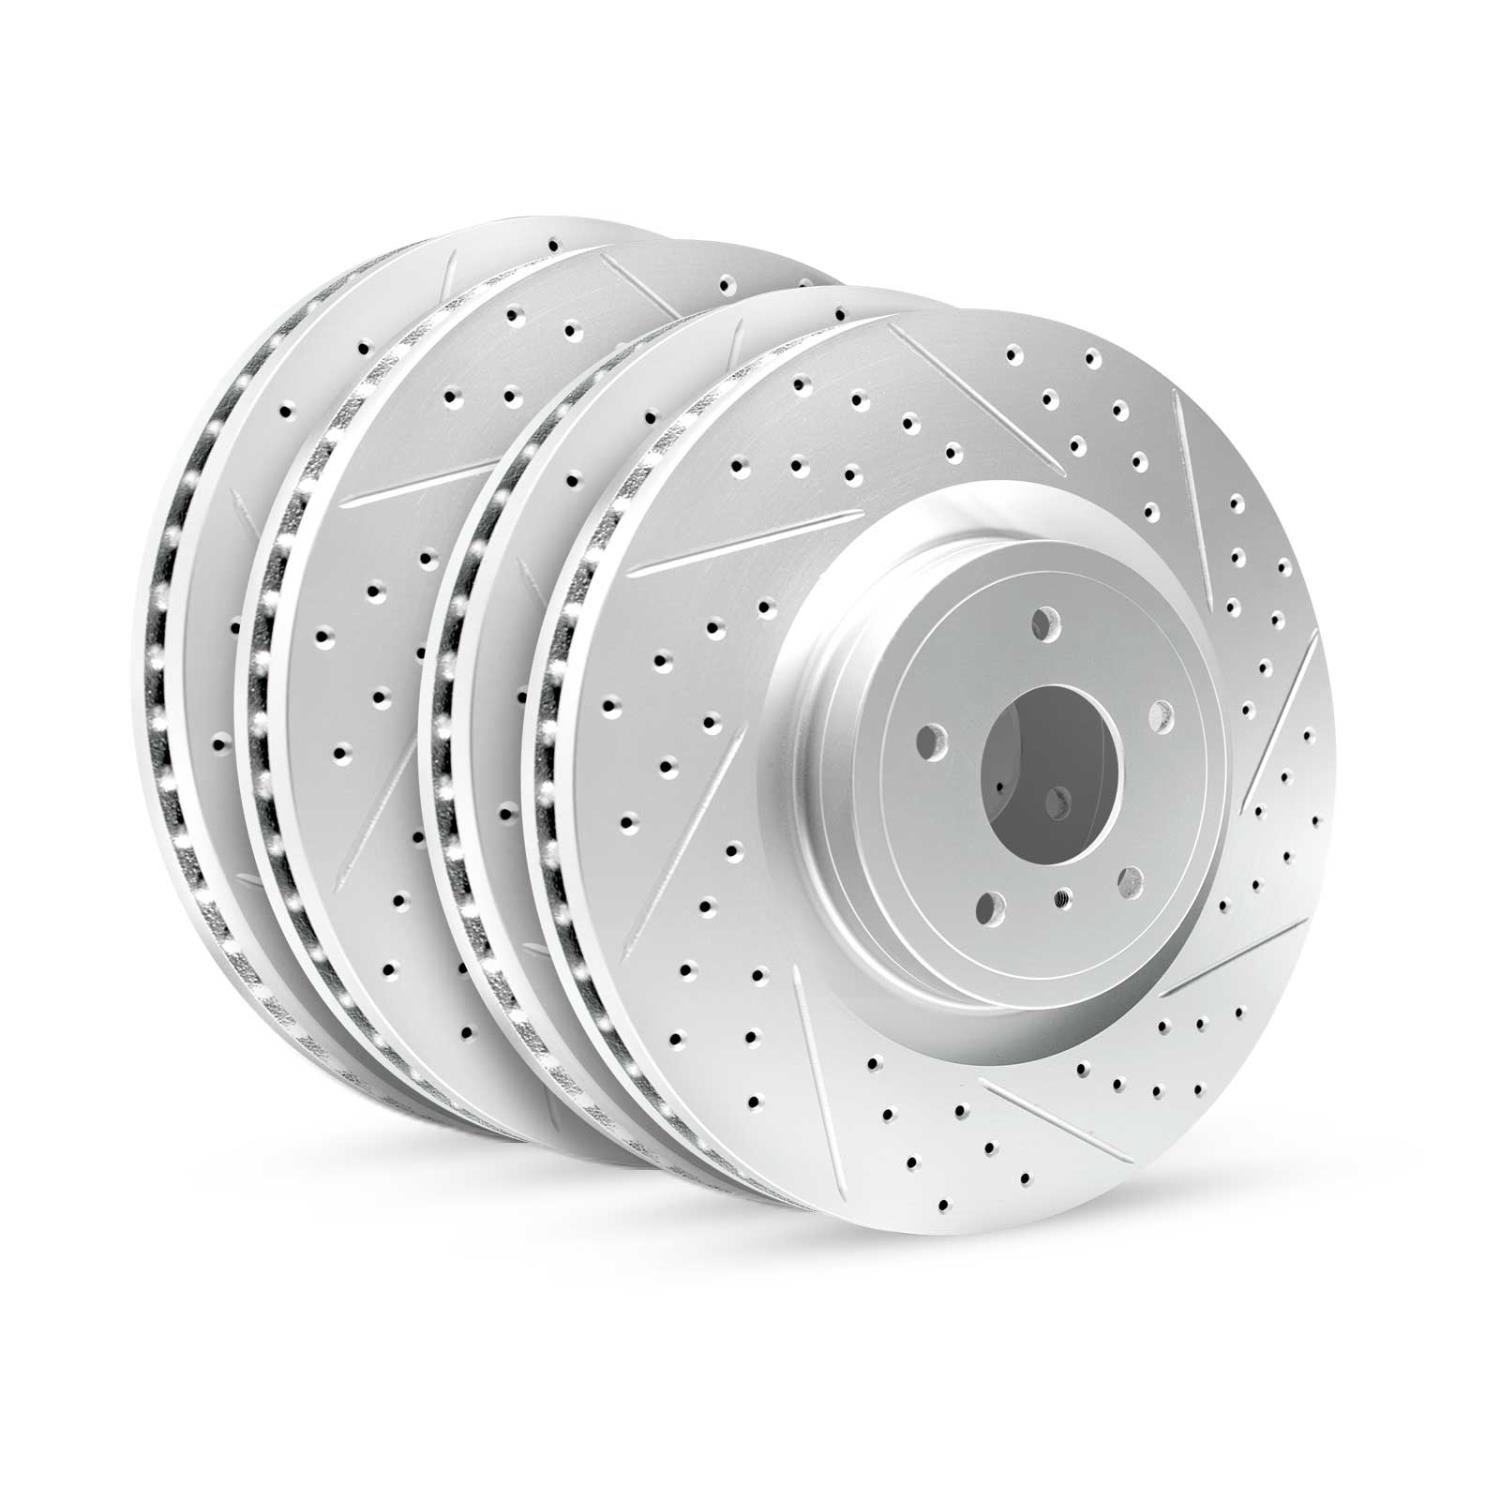 GEO-Carbon Drilled/Slotted Rotors, 2005-2010 Kia/Hyundai/Genesis, Position: Front/Rear